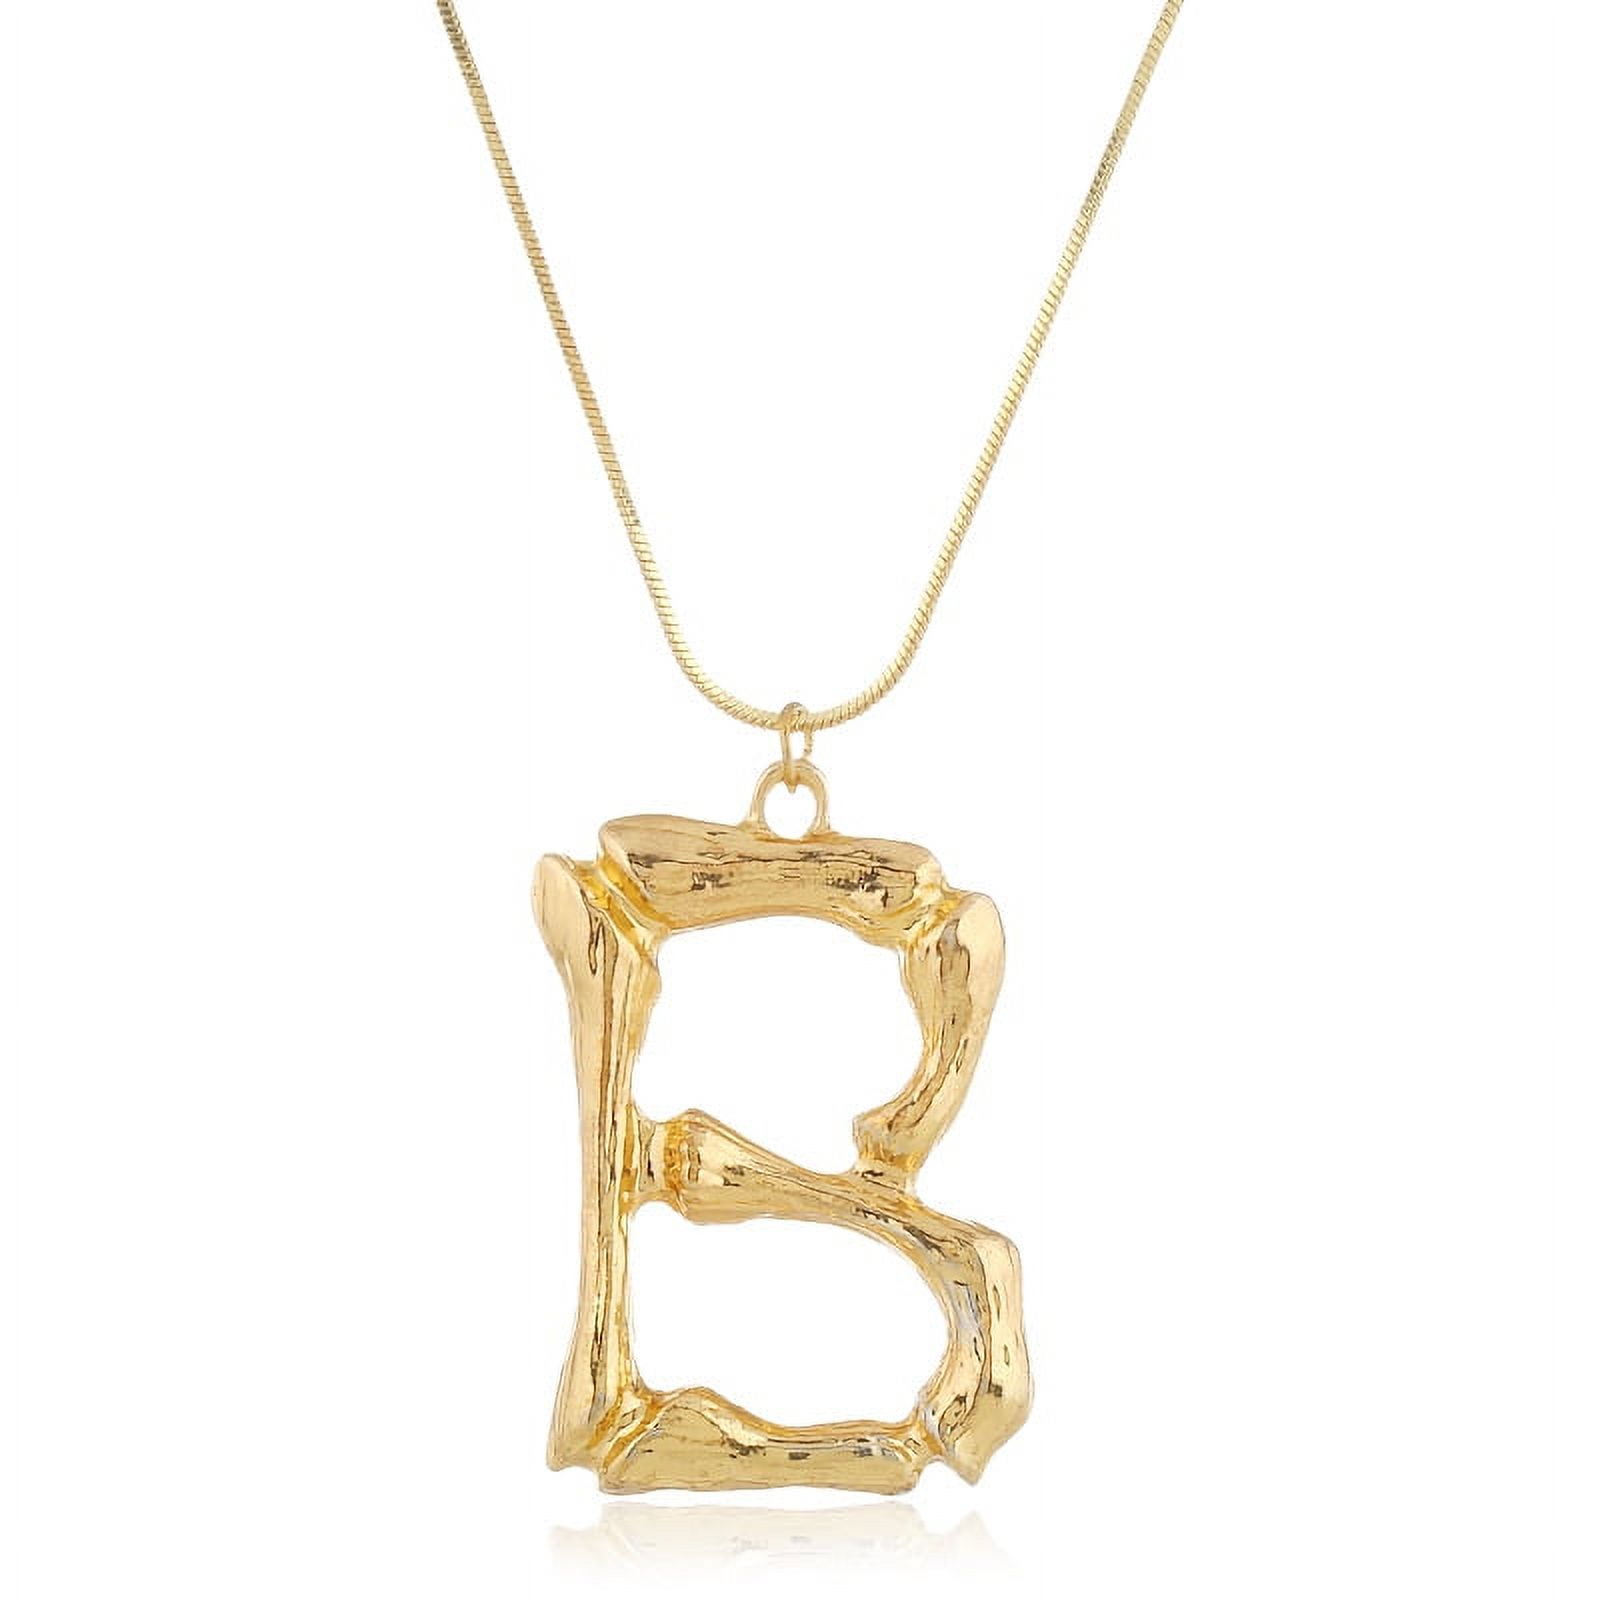 LARGE INITIAL NECKLACE – Nell and Digby